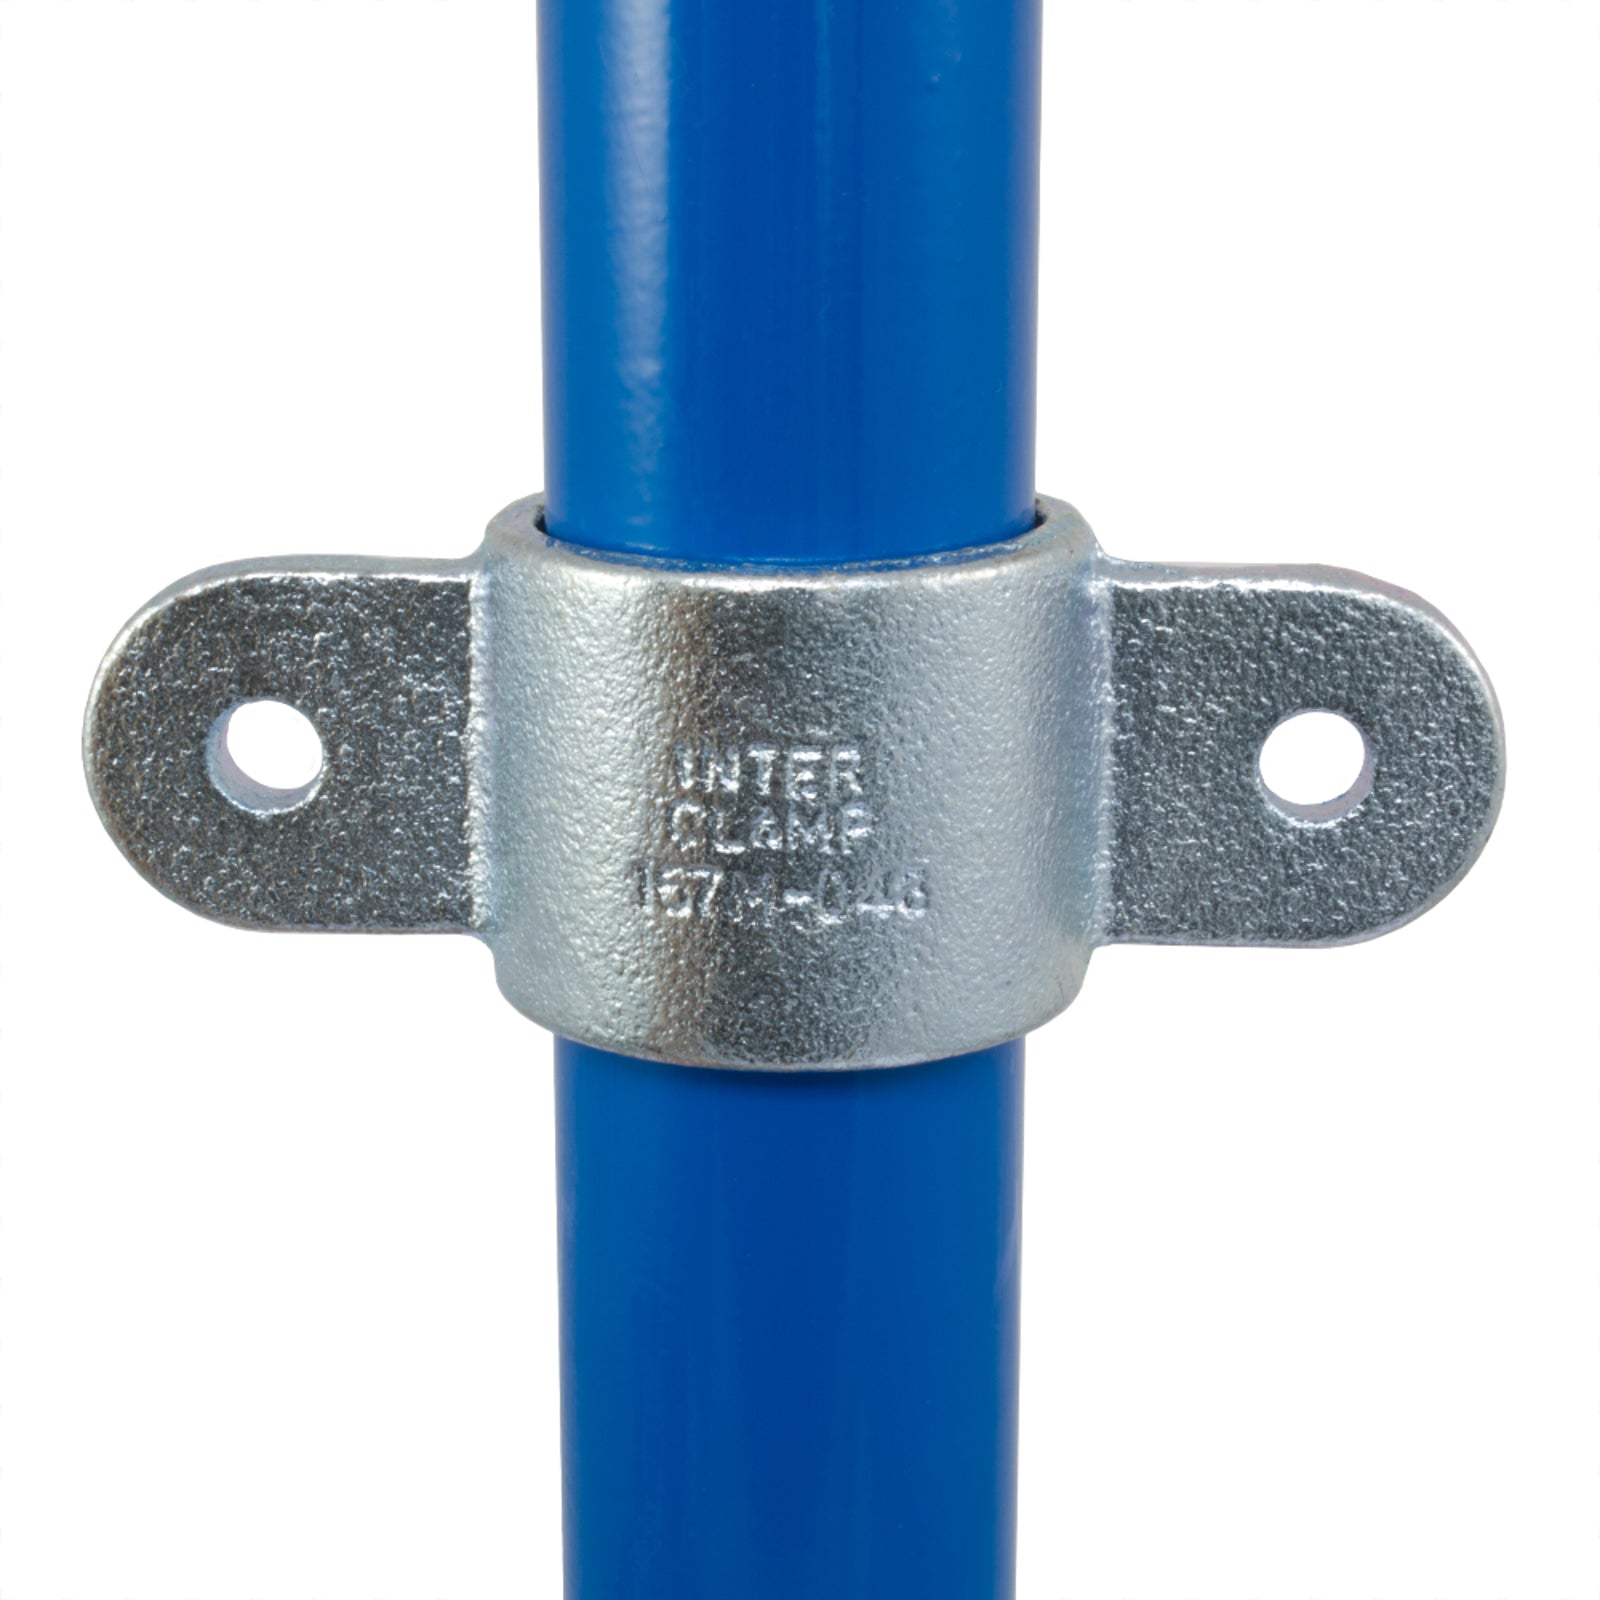 Double Swivel Combination Male Part, Interclamp Code 167M. Shop rail, pipe and fence fittings online chain.com.au. Australia wide shipping.